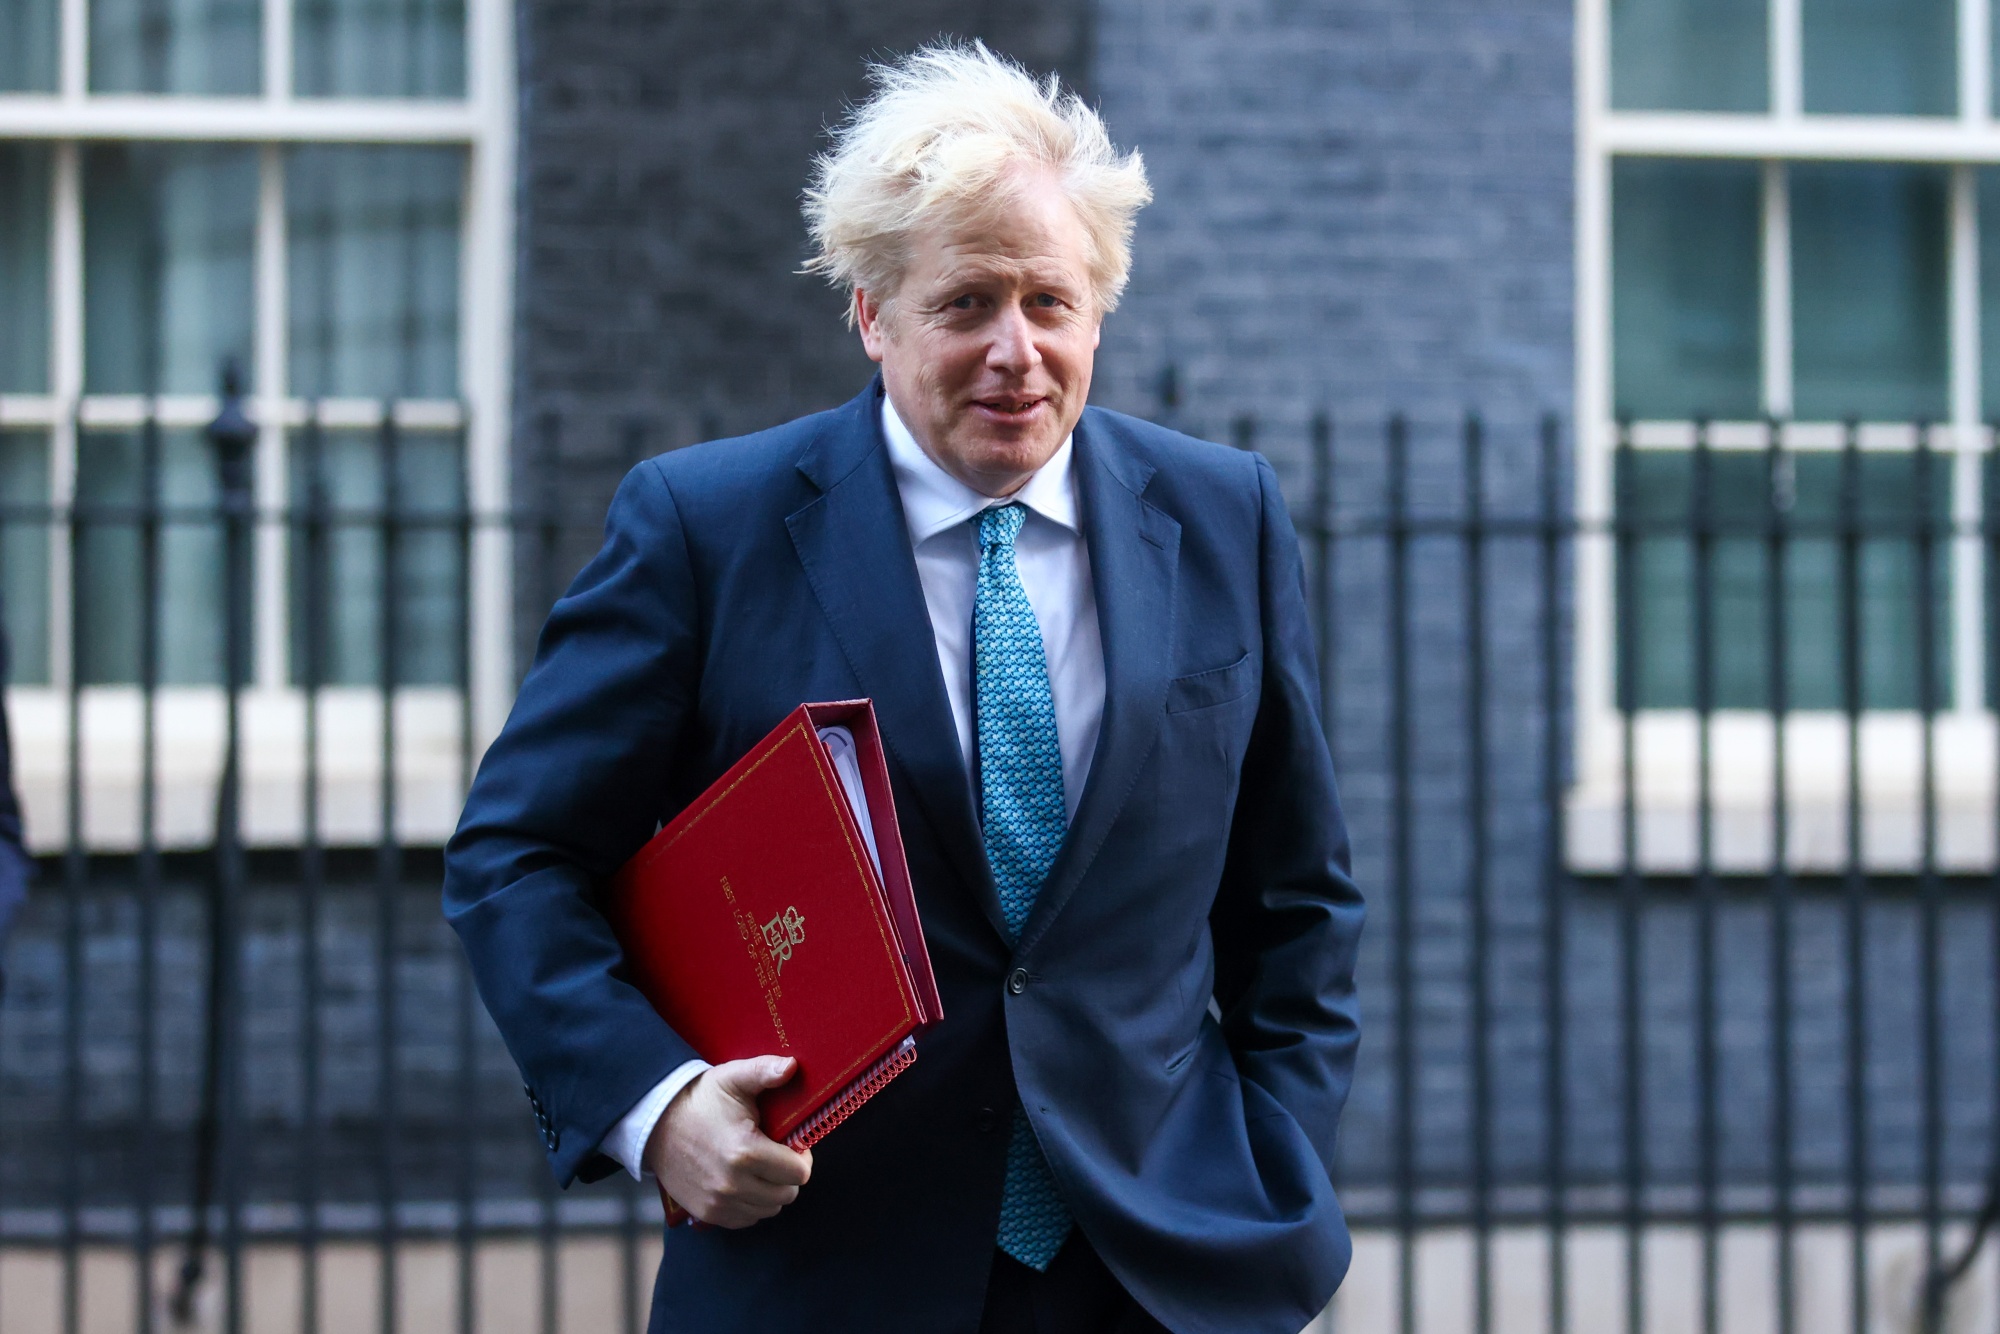 Businesses had been invited to submit questions to Boris Johnson and his ministers in advance, a person familiar with the planned call said.